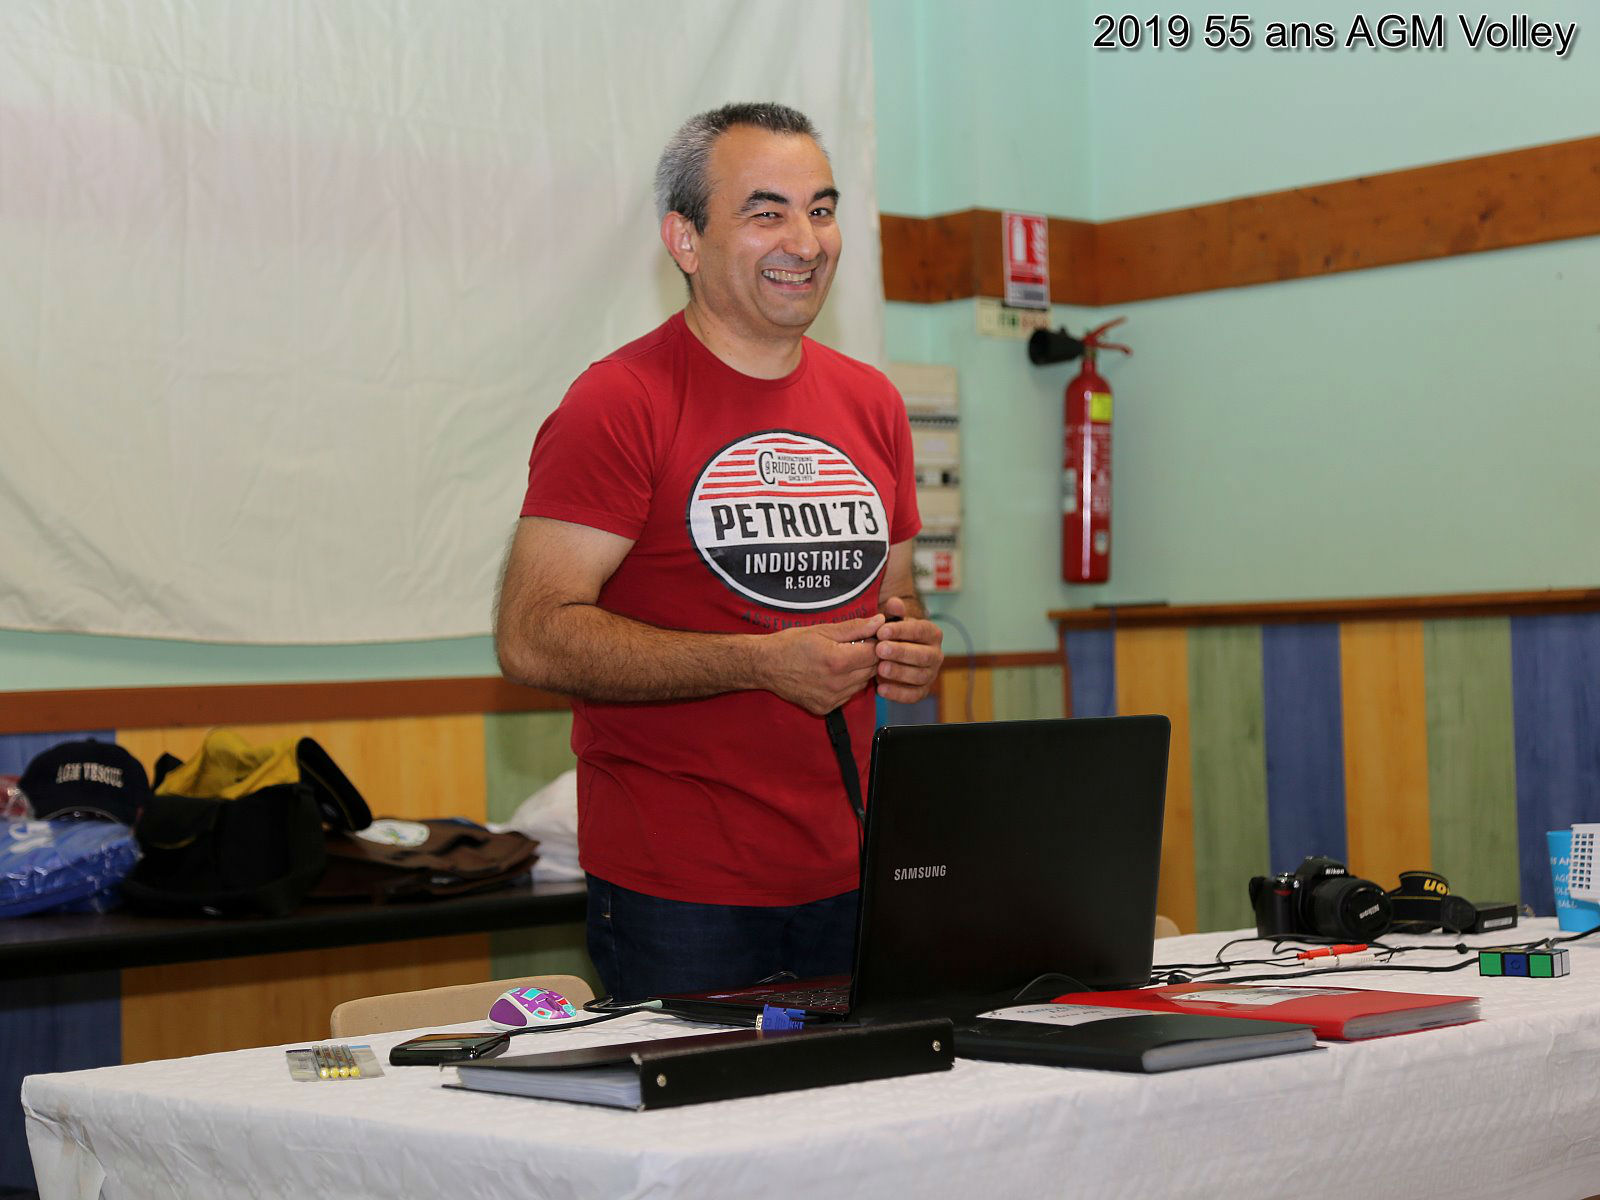 2019_55 ans AGM Volley_004